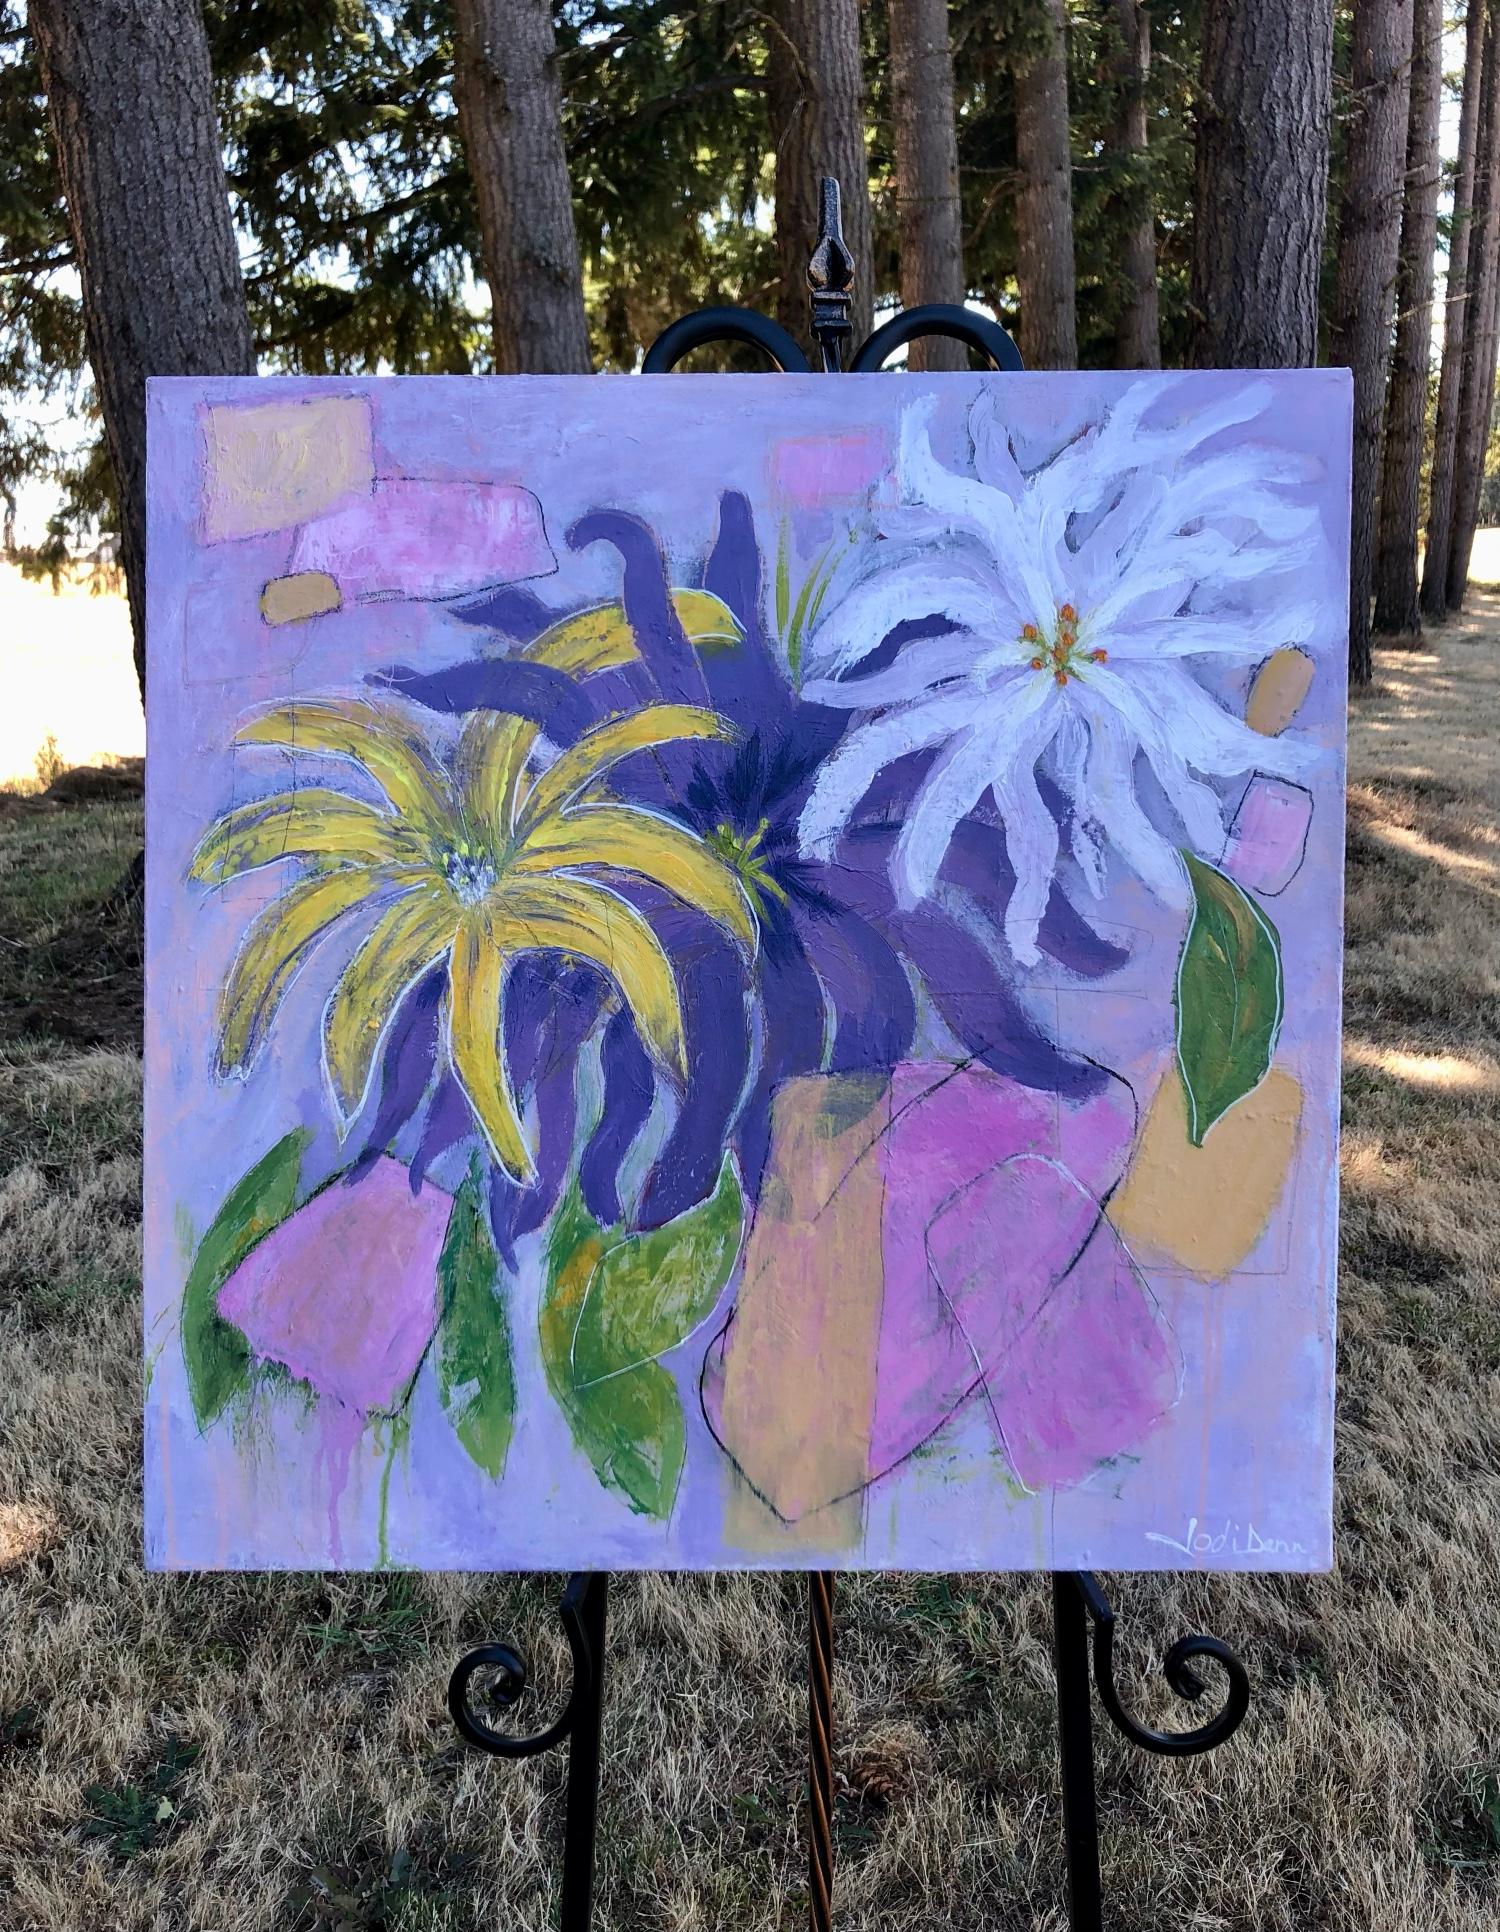 <p>Artist Comments<br>An expressive display of dahlias thrives in artist Jodi Dann's playful piece. The yellow, purple, and white blossoms sprout beautifully along an abstract background. 